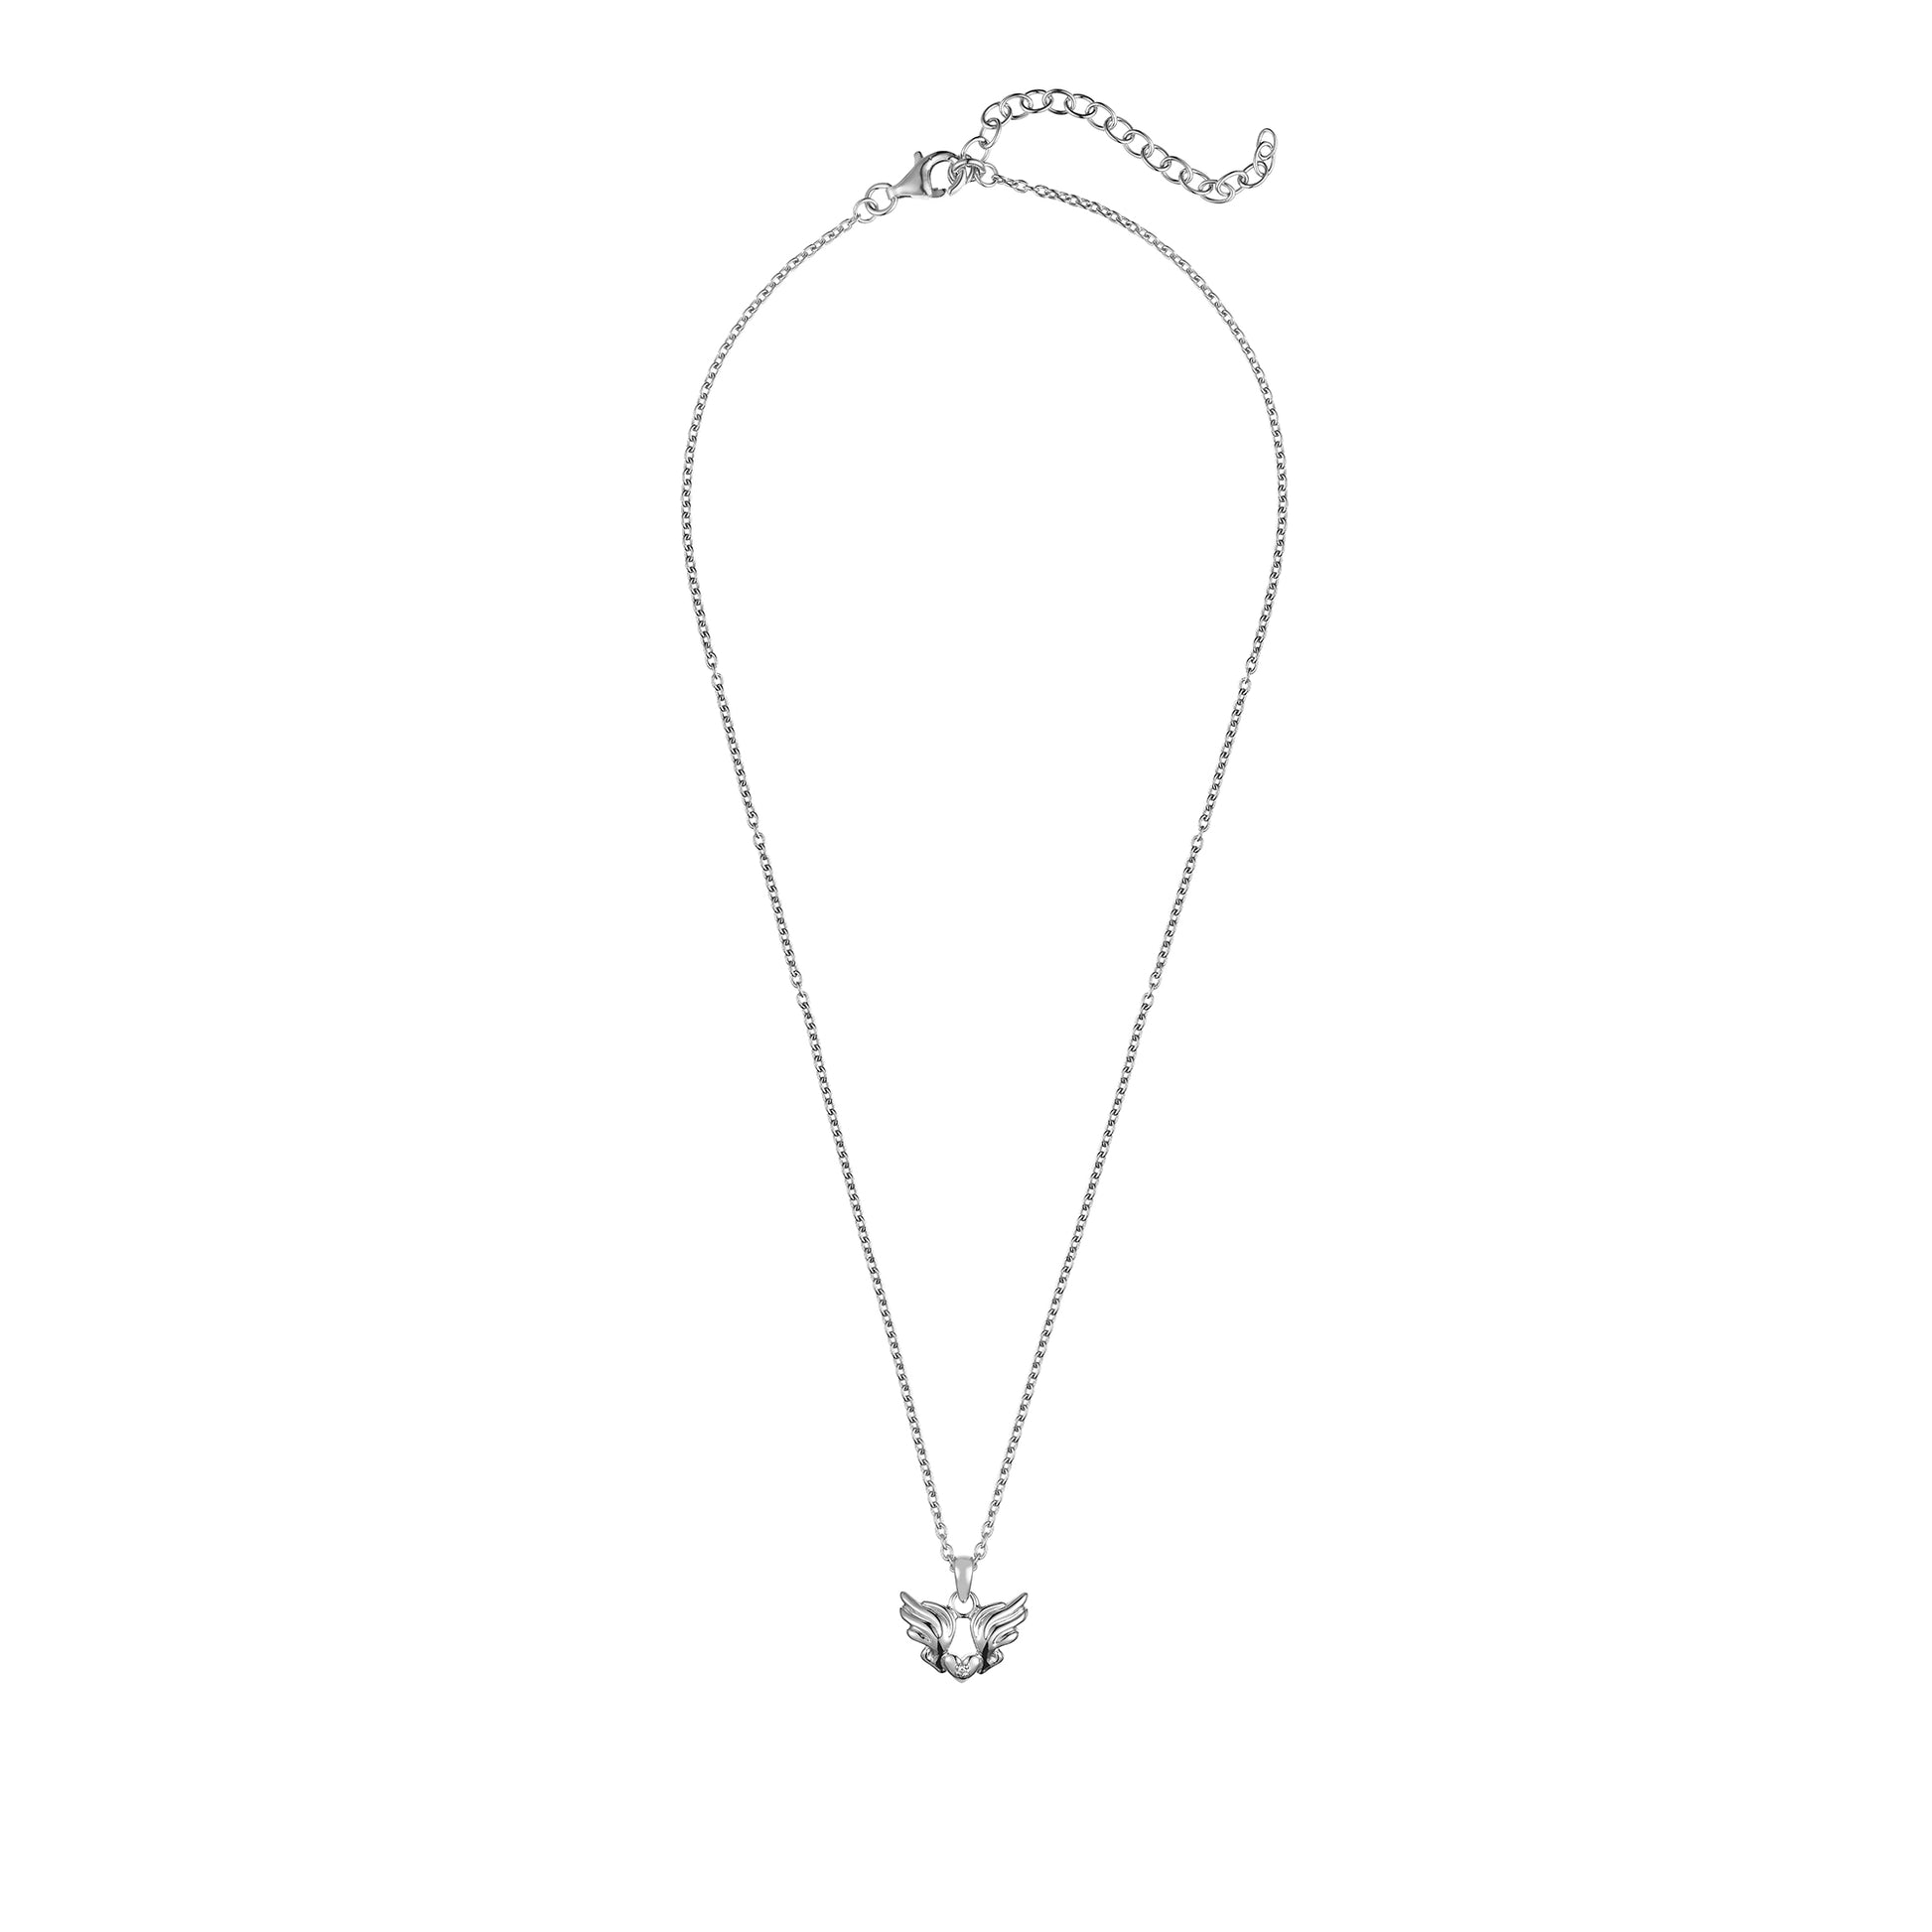 Children's Sterling Silver Angel Wings and Heart Pendant with Diamond on an Extendable Chain Necklace